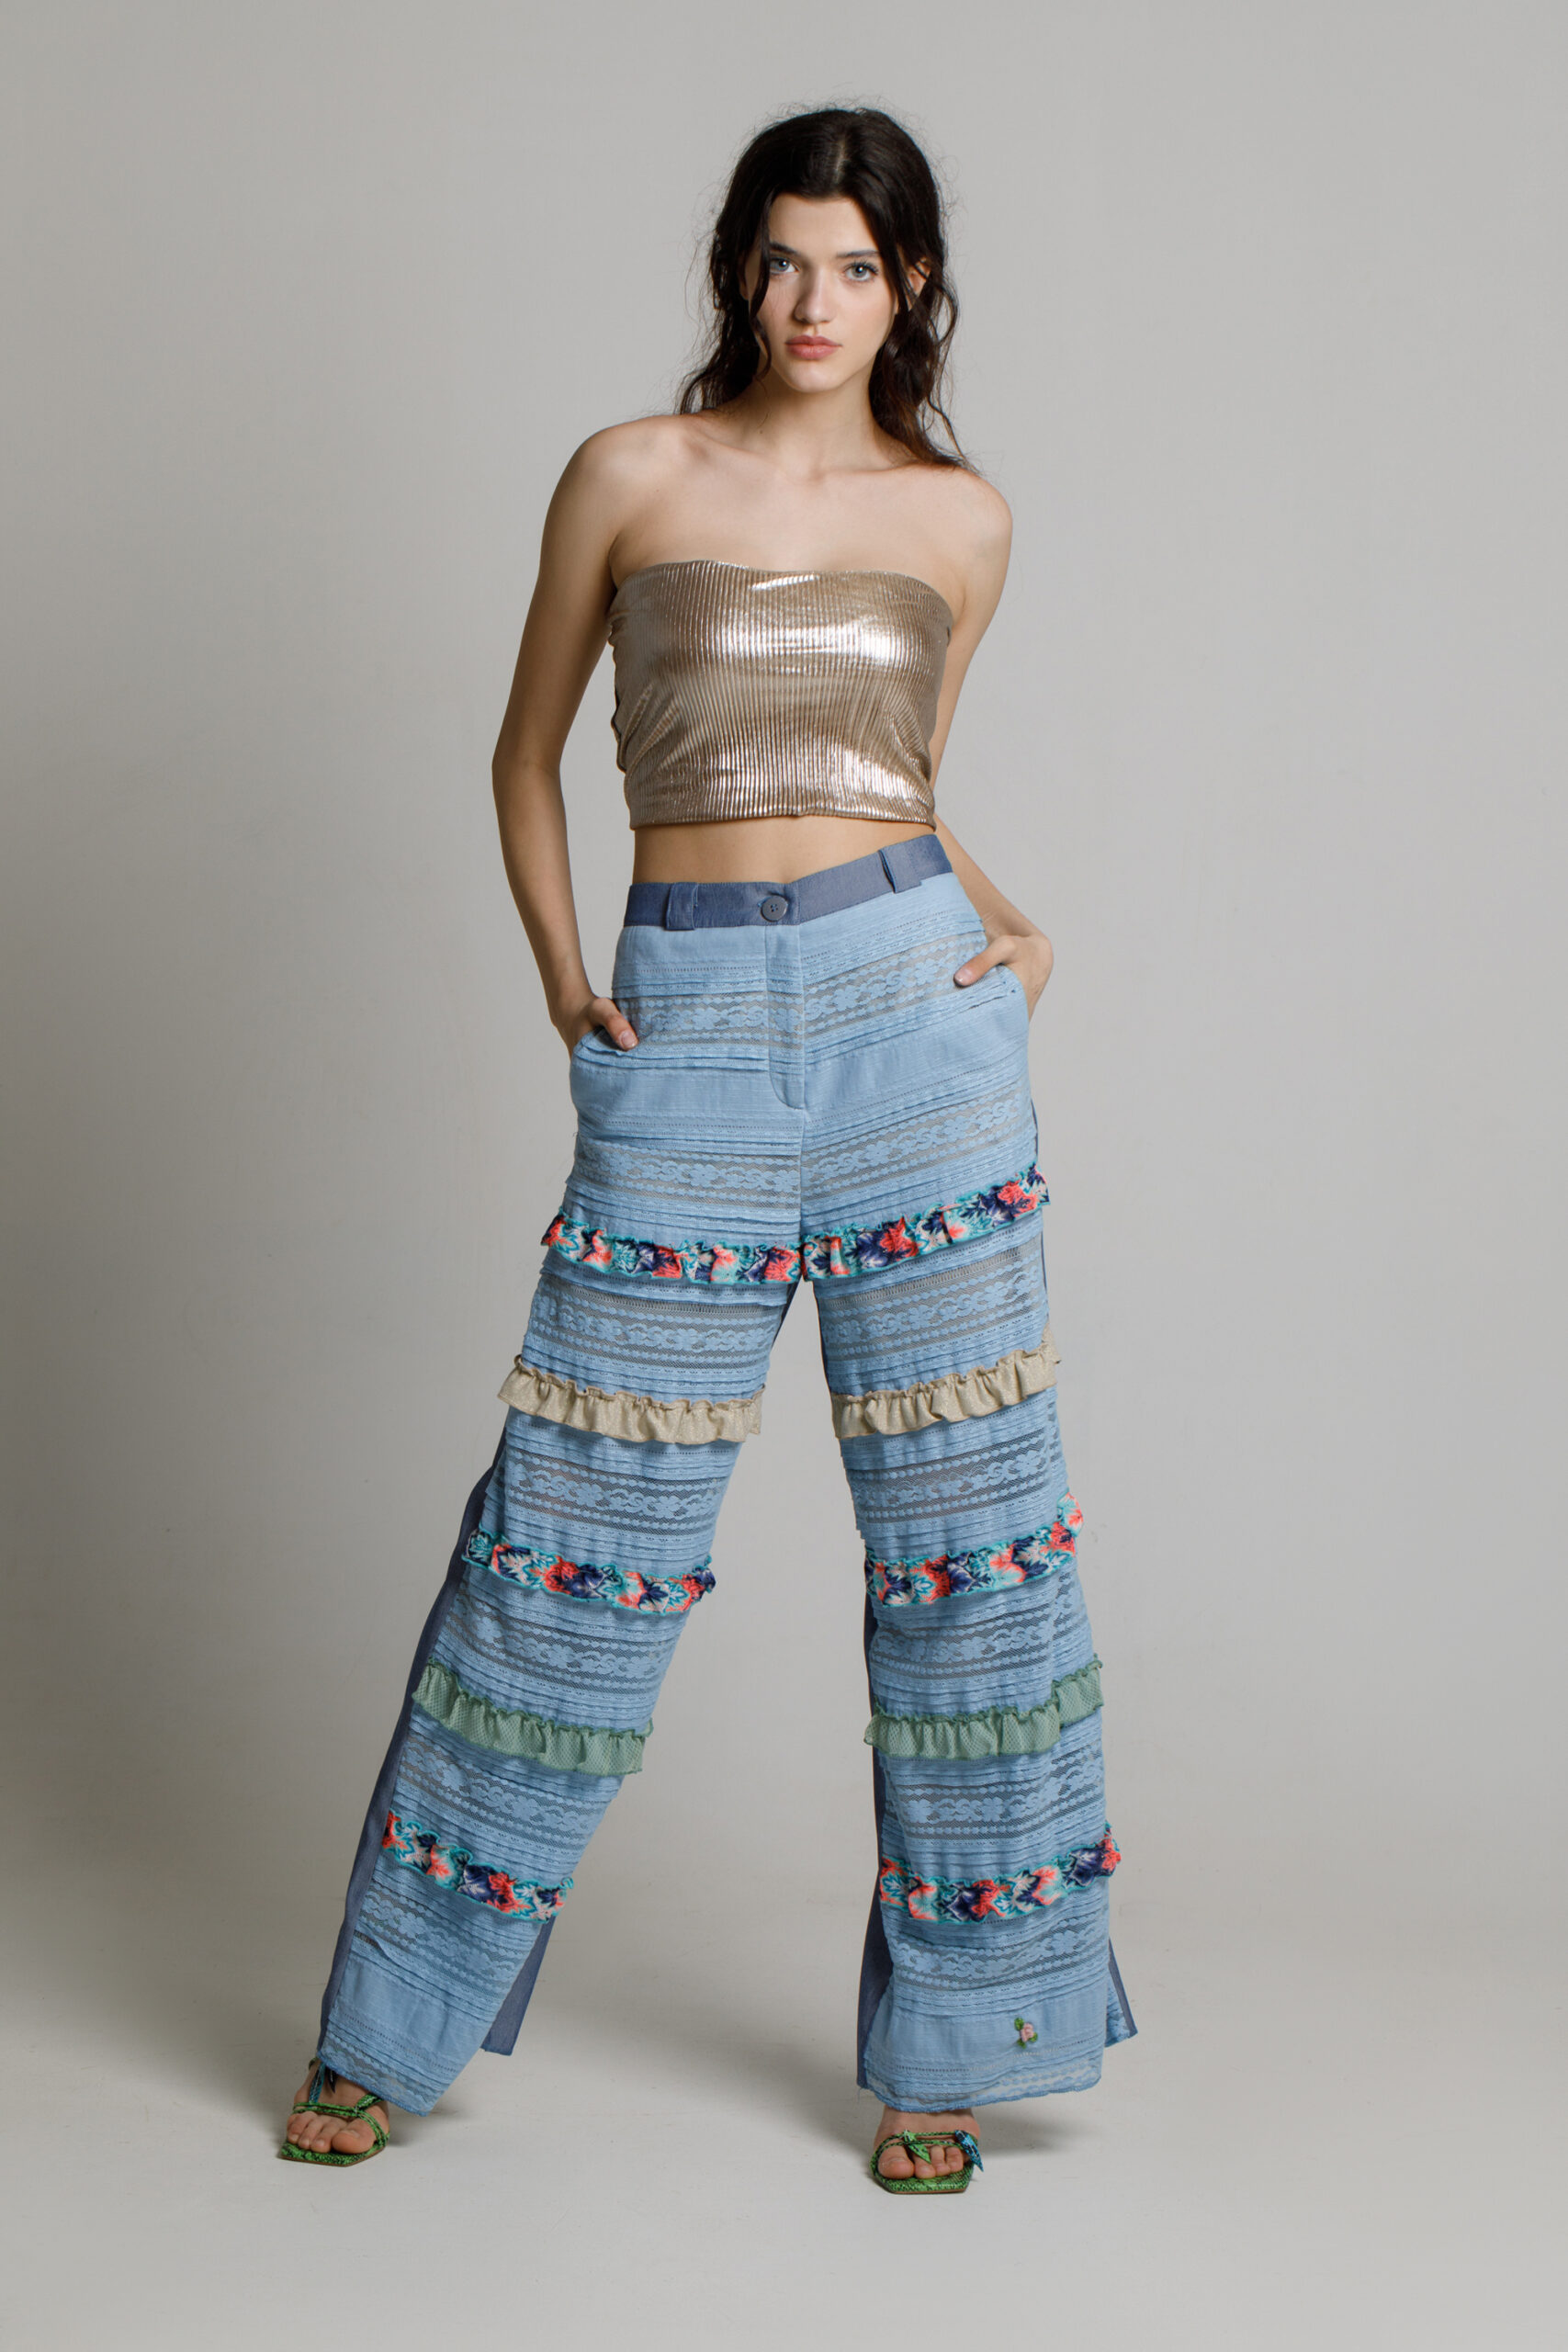 OPAL jeans and lace pants. Natural fabrics, original design, handmade embroidery